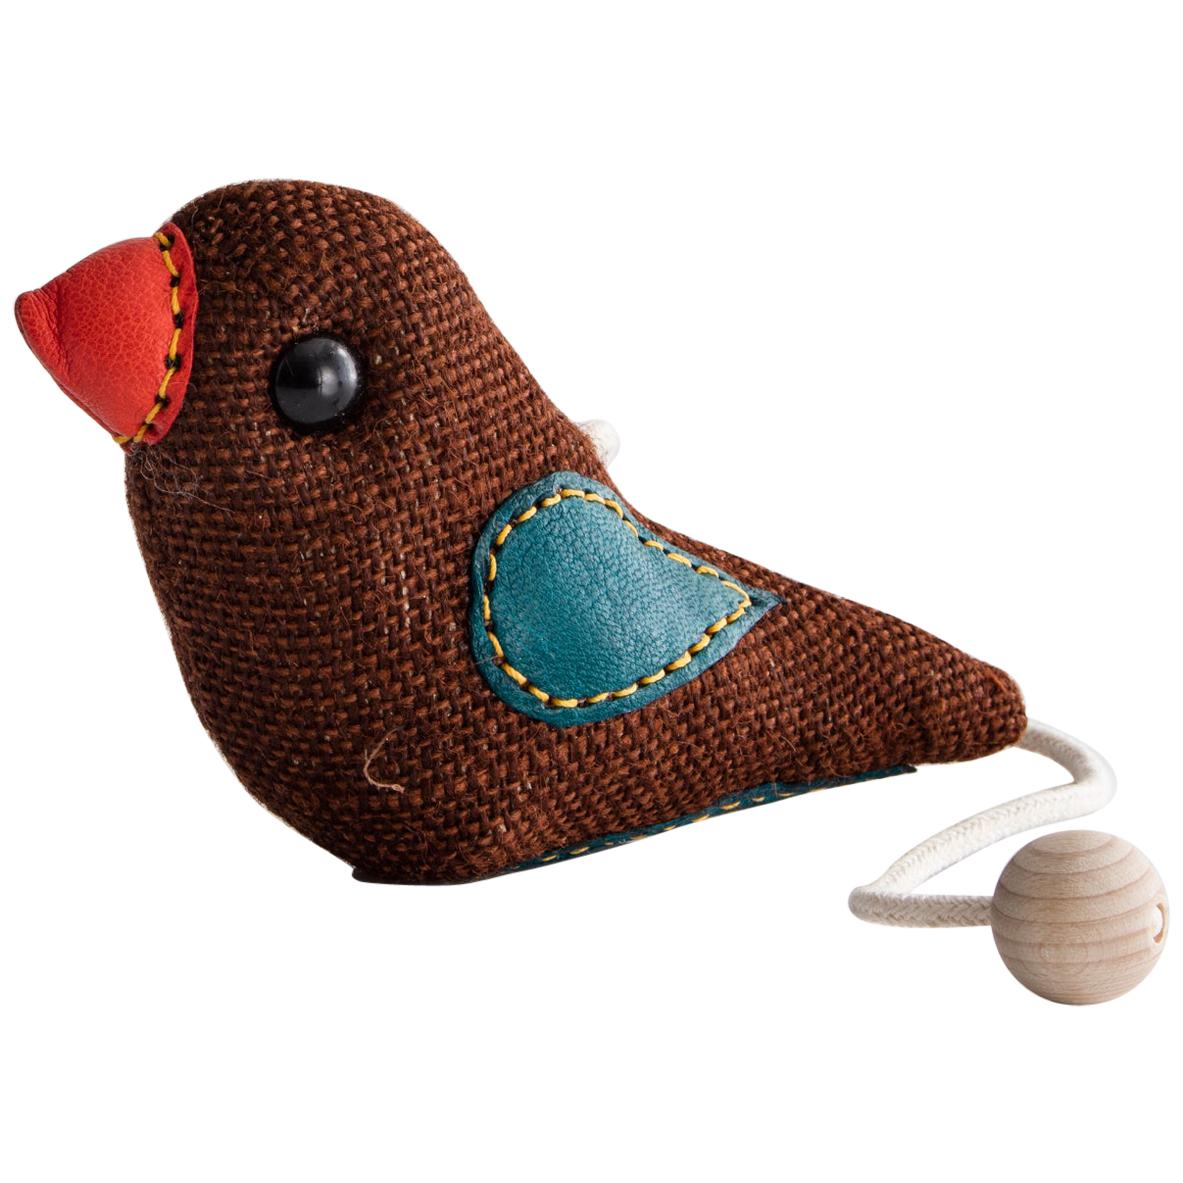 Therapeutic Bird Toy in Brown Jute with Leather by Renate Müller, 1981-1982